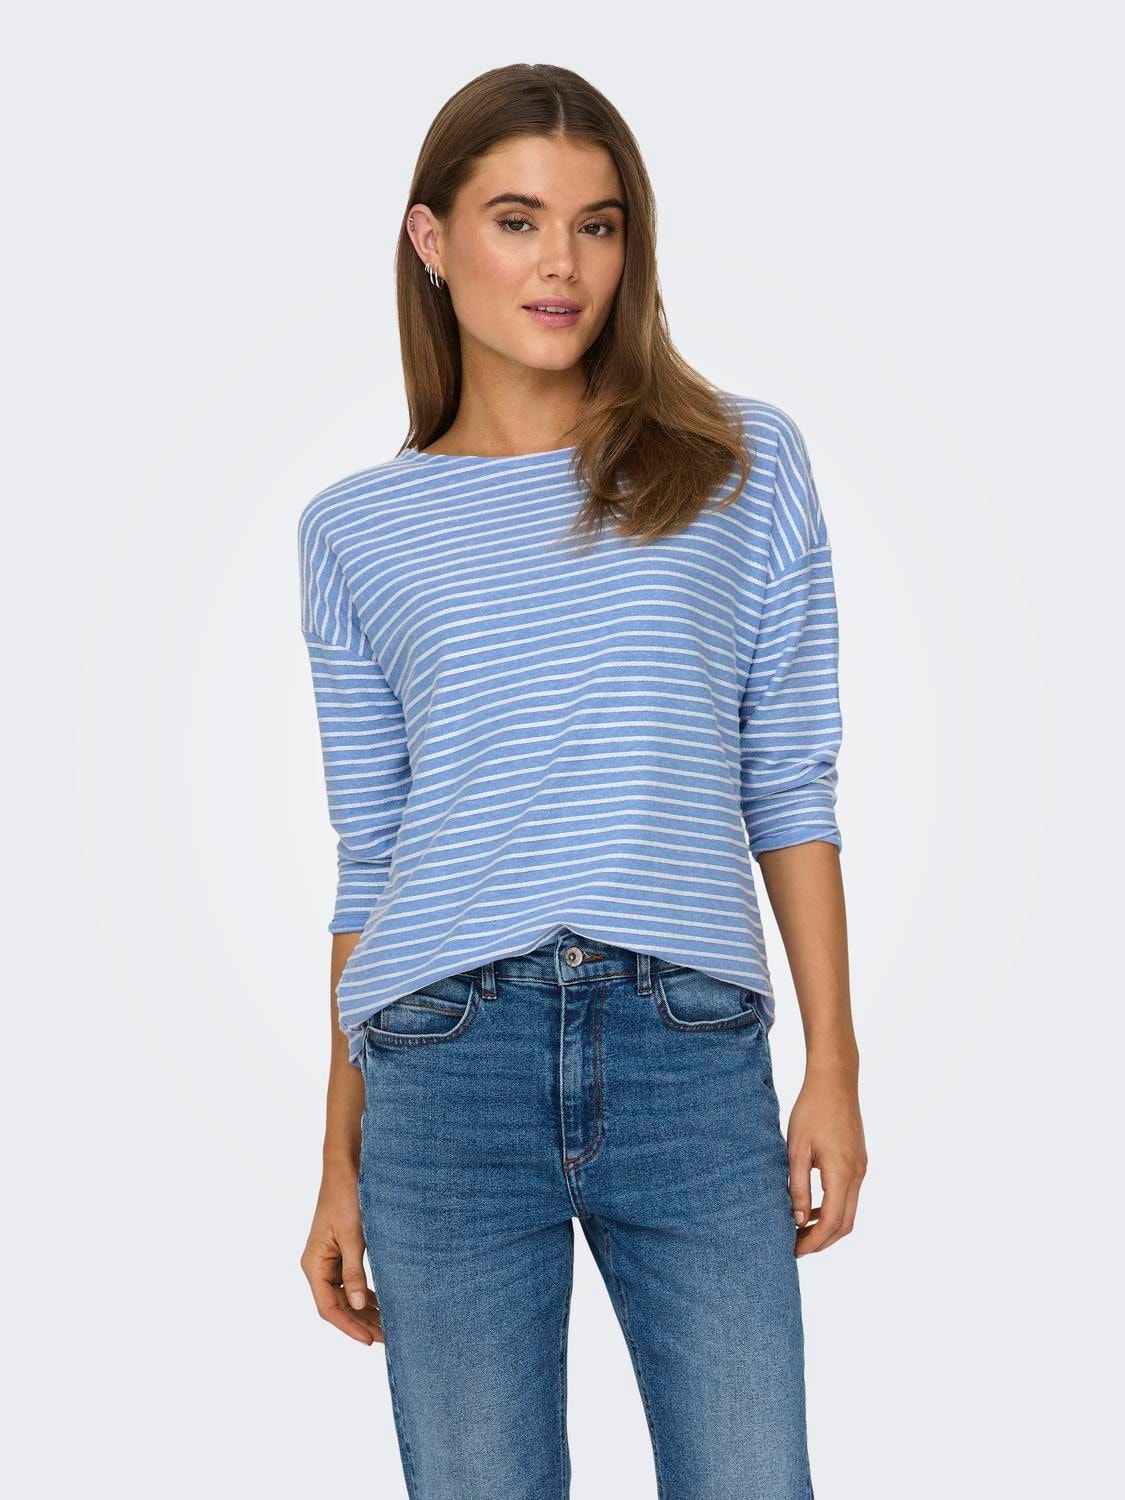 ONLY Boatneck 3/4 sleeved top -Provence - 15173186